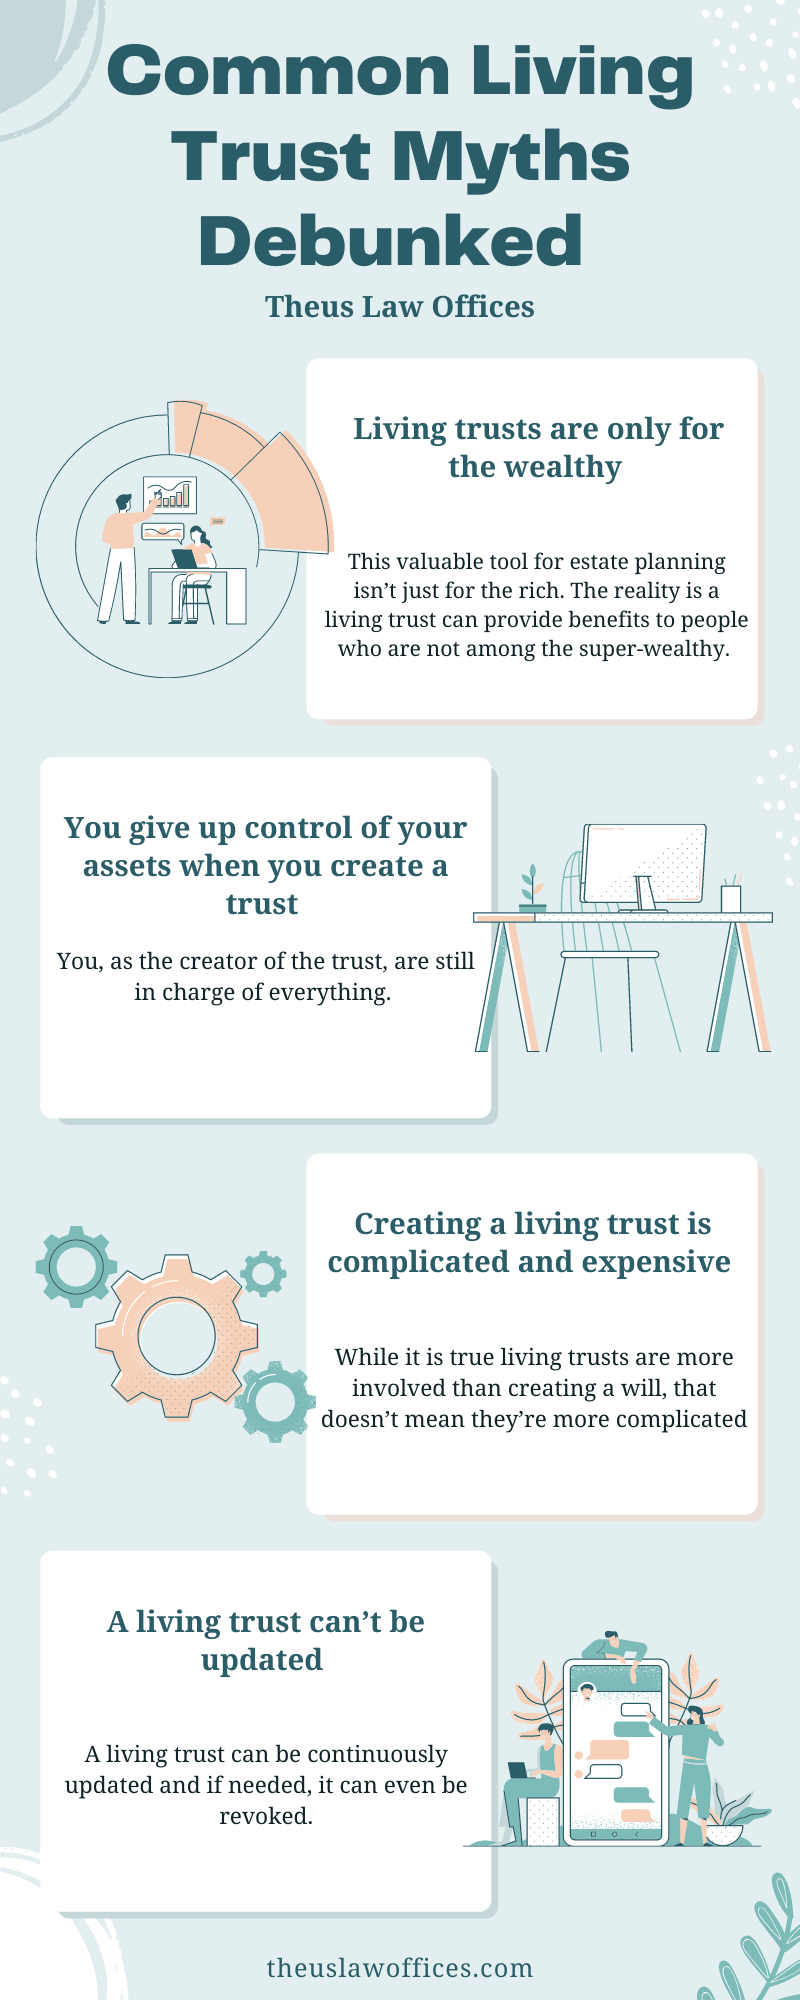 Common Living Trust Myths Debunked Infographic